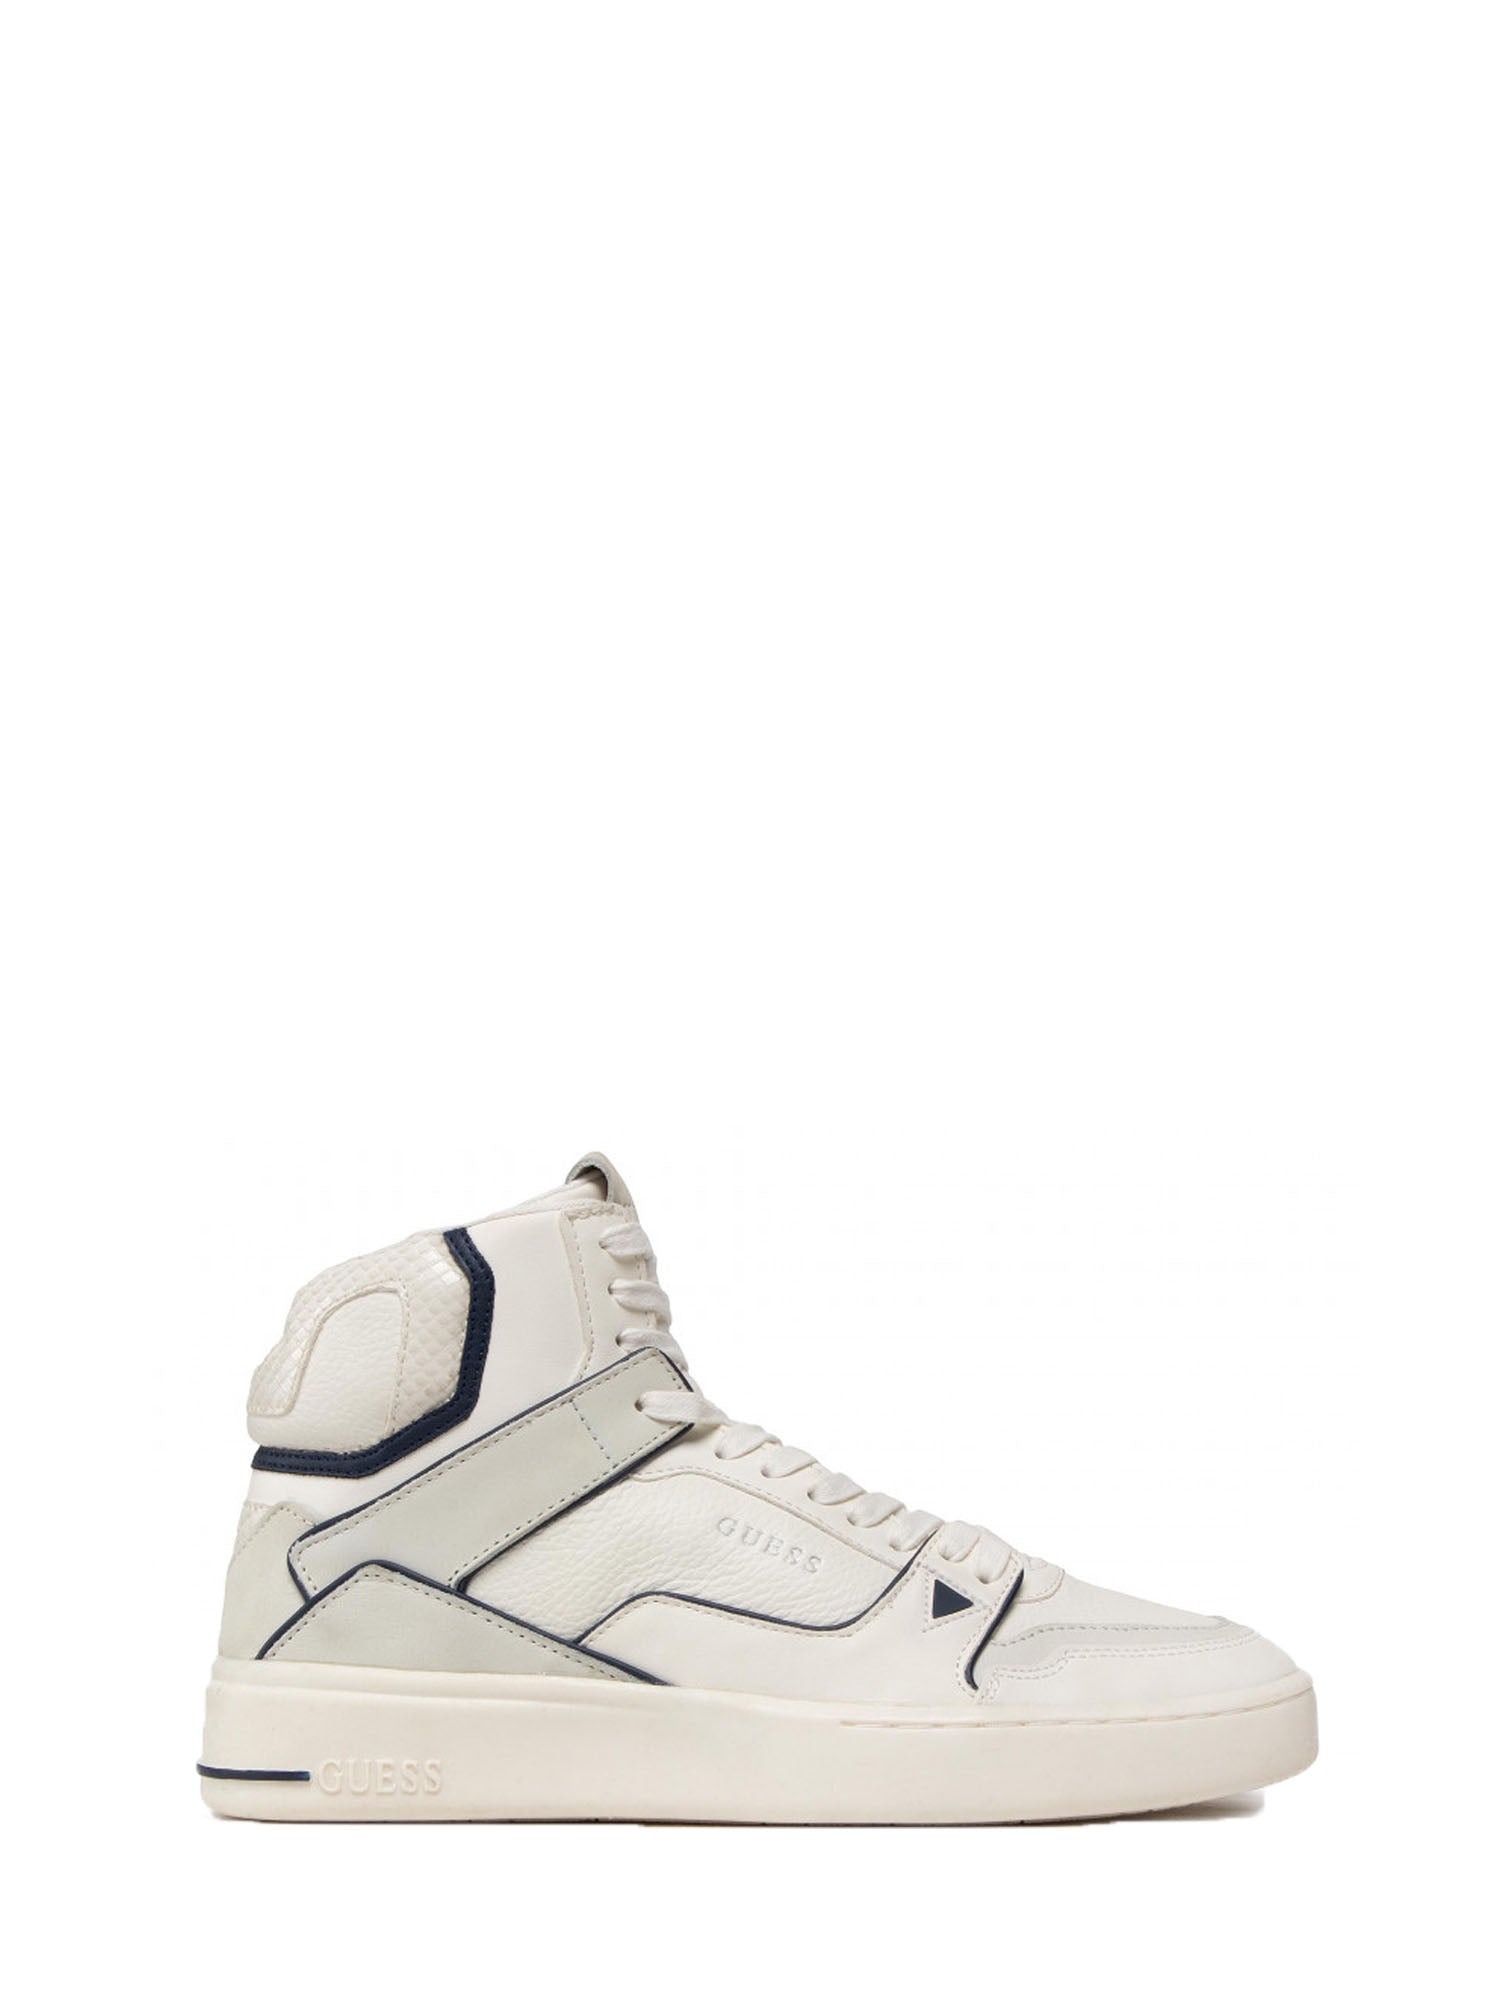 GUESS JEANS SNEAKERS VERONA BASKET MID BIANCO